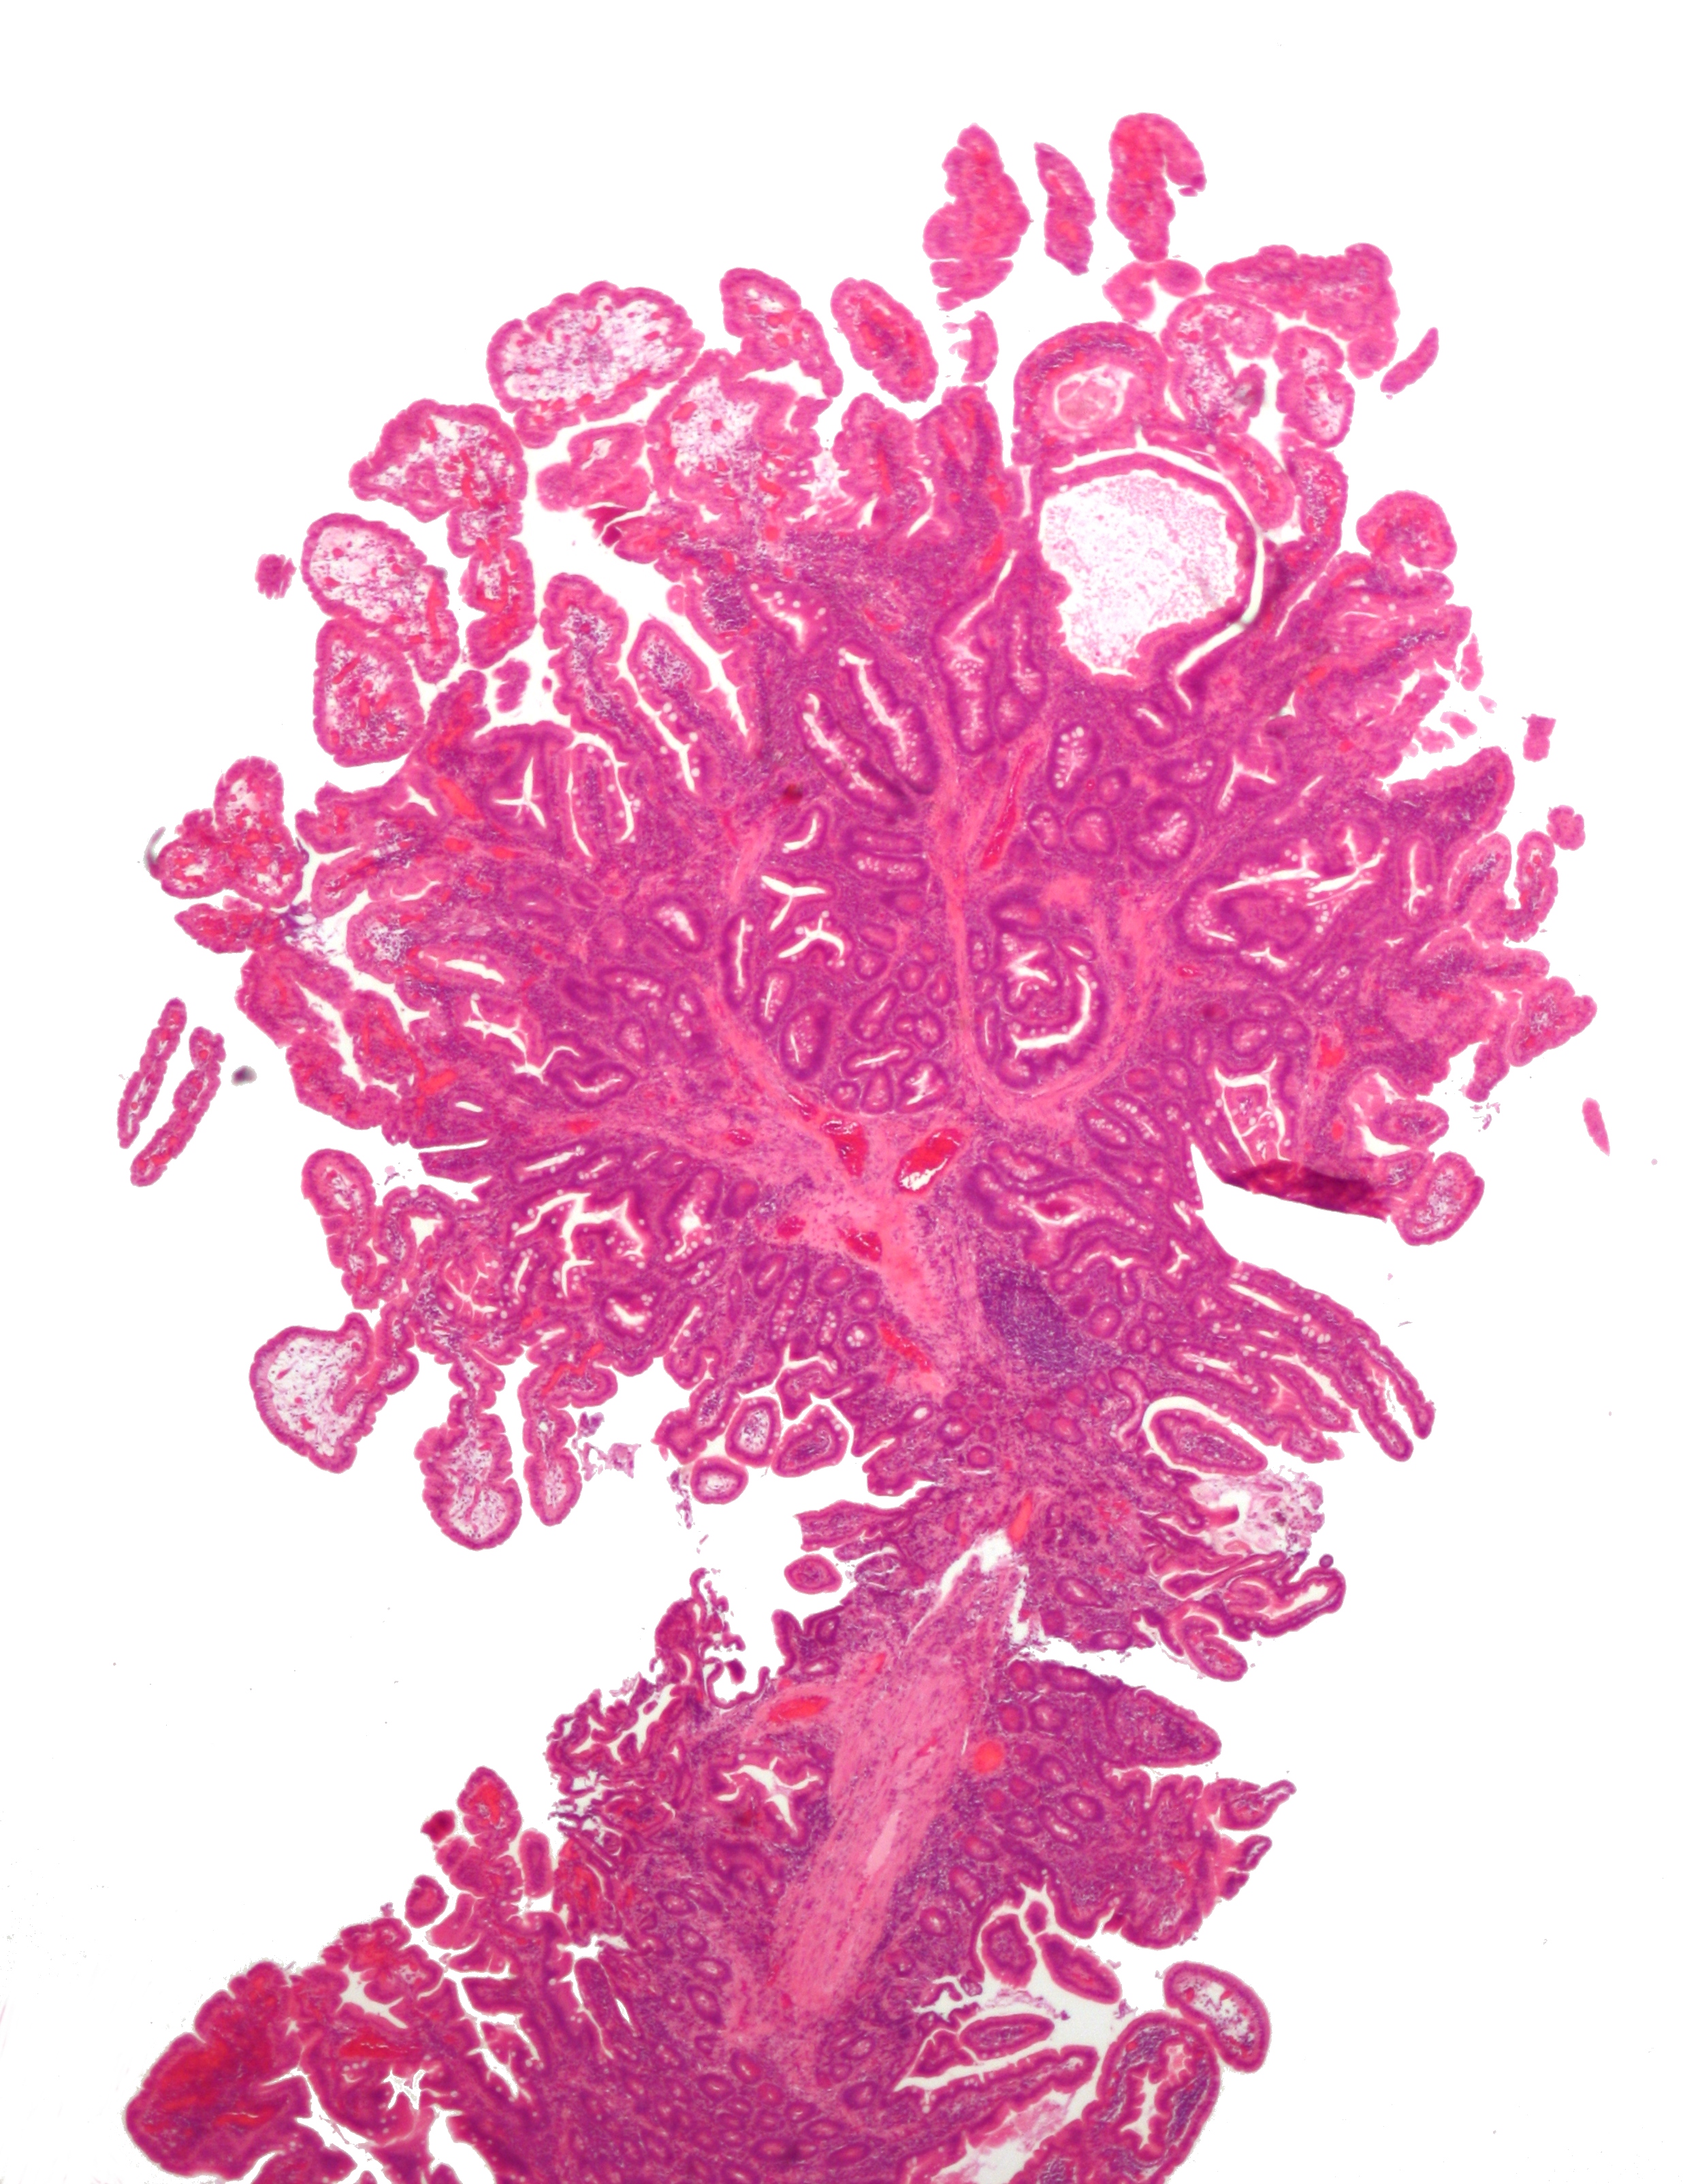 File:Peutz-Jeghers syndrome polyp .jpg